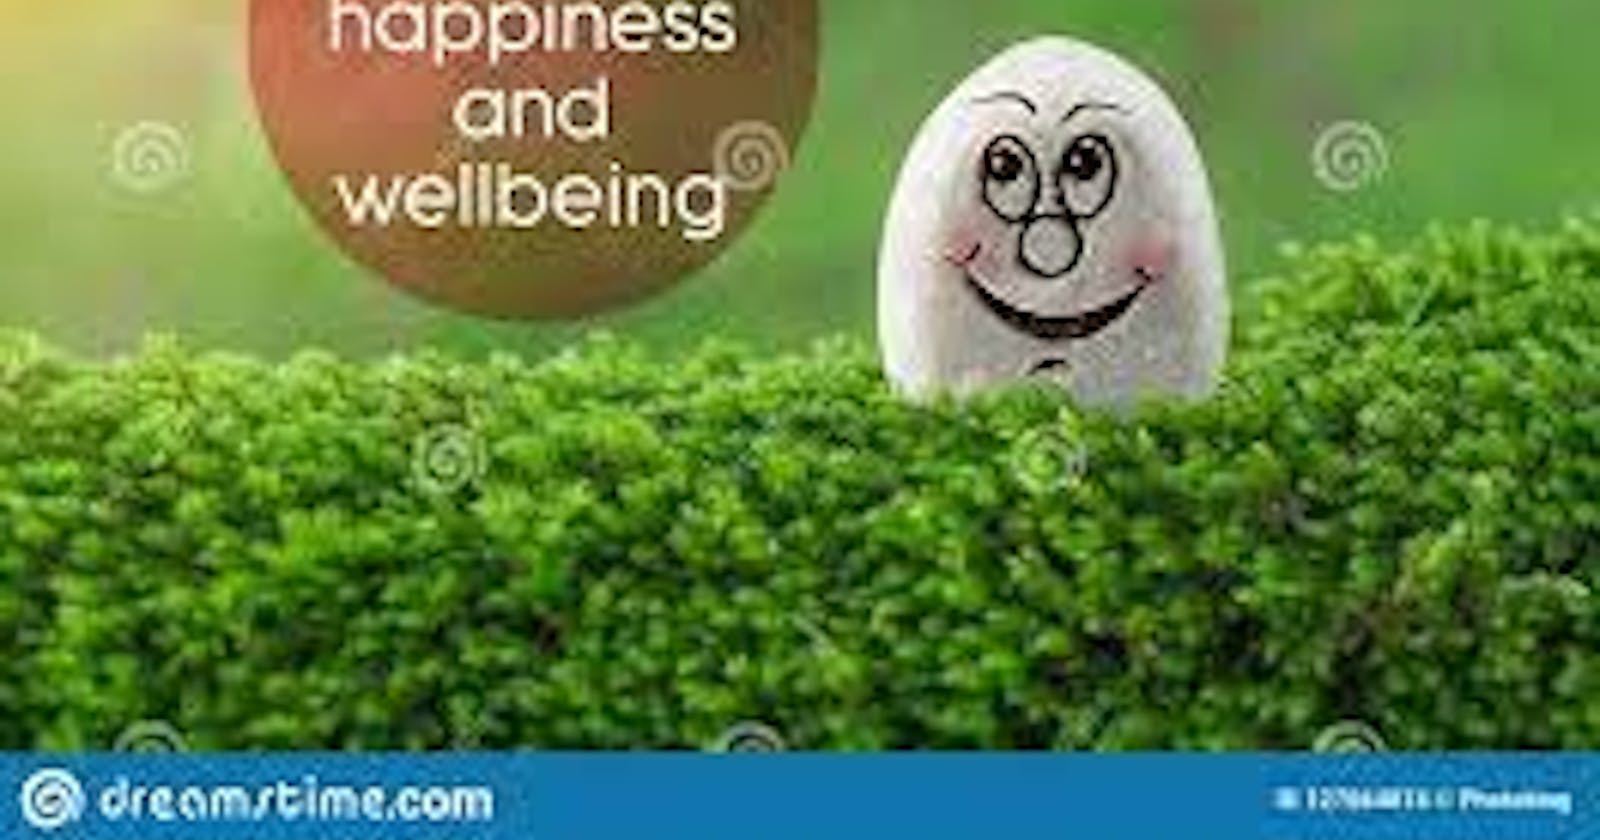 Happiness and Well-Being